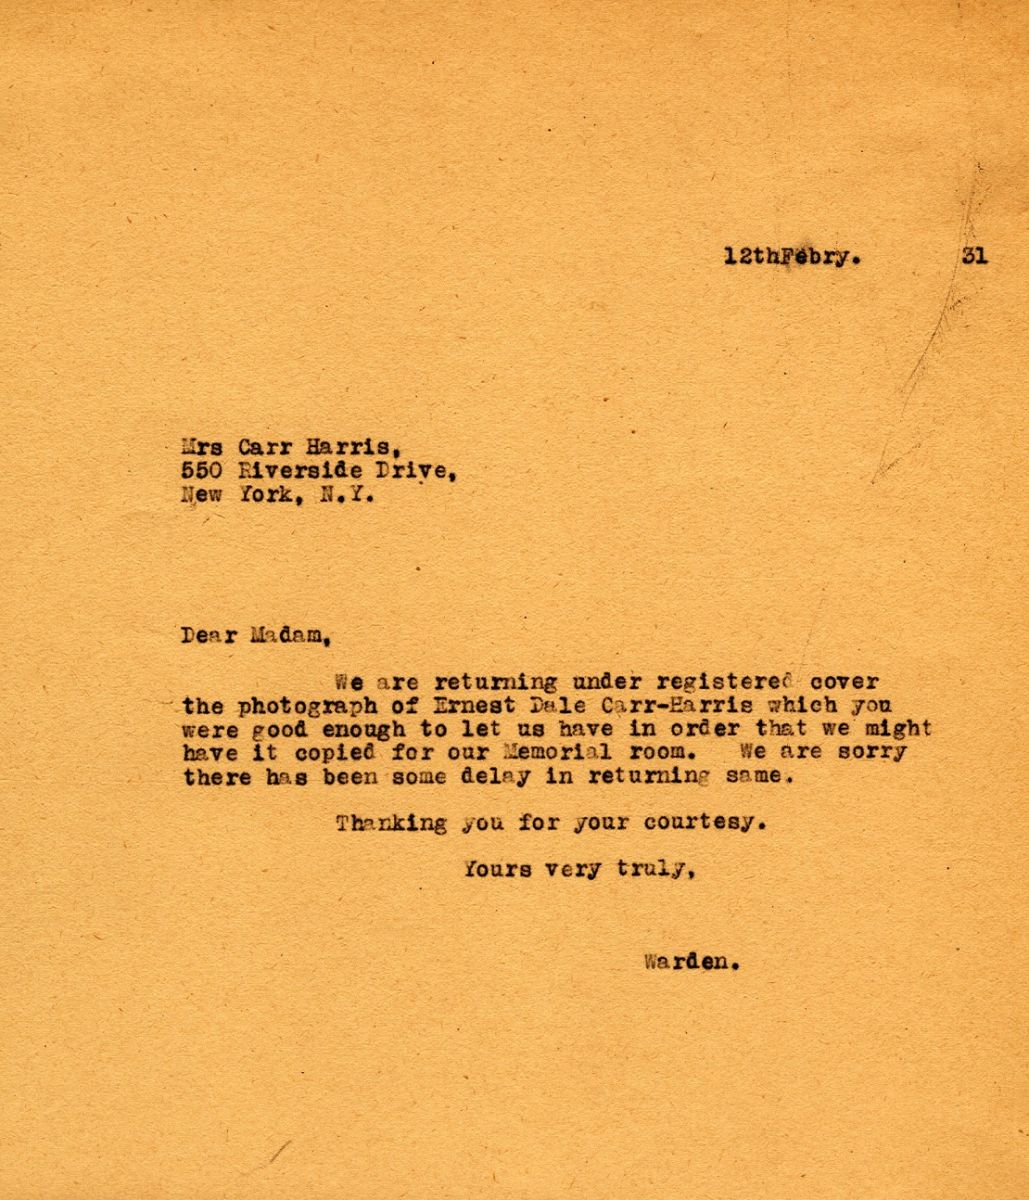 Letter from the Warden to Mrs. Carr-Harris, 12th February 1931